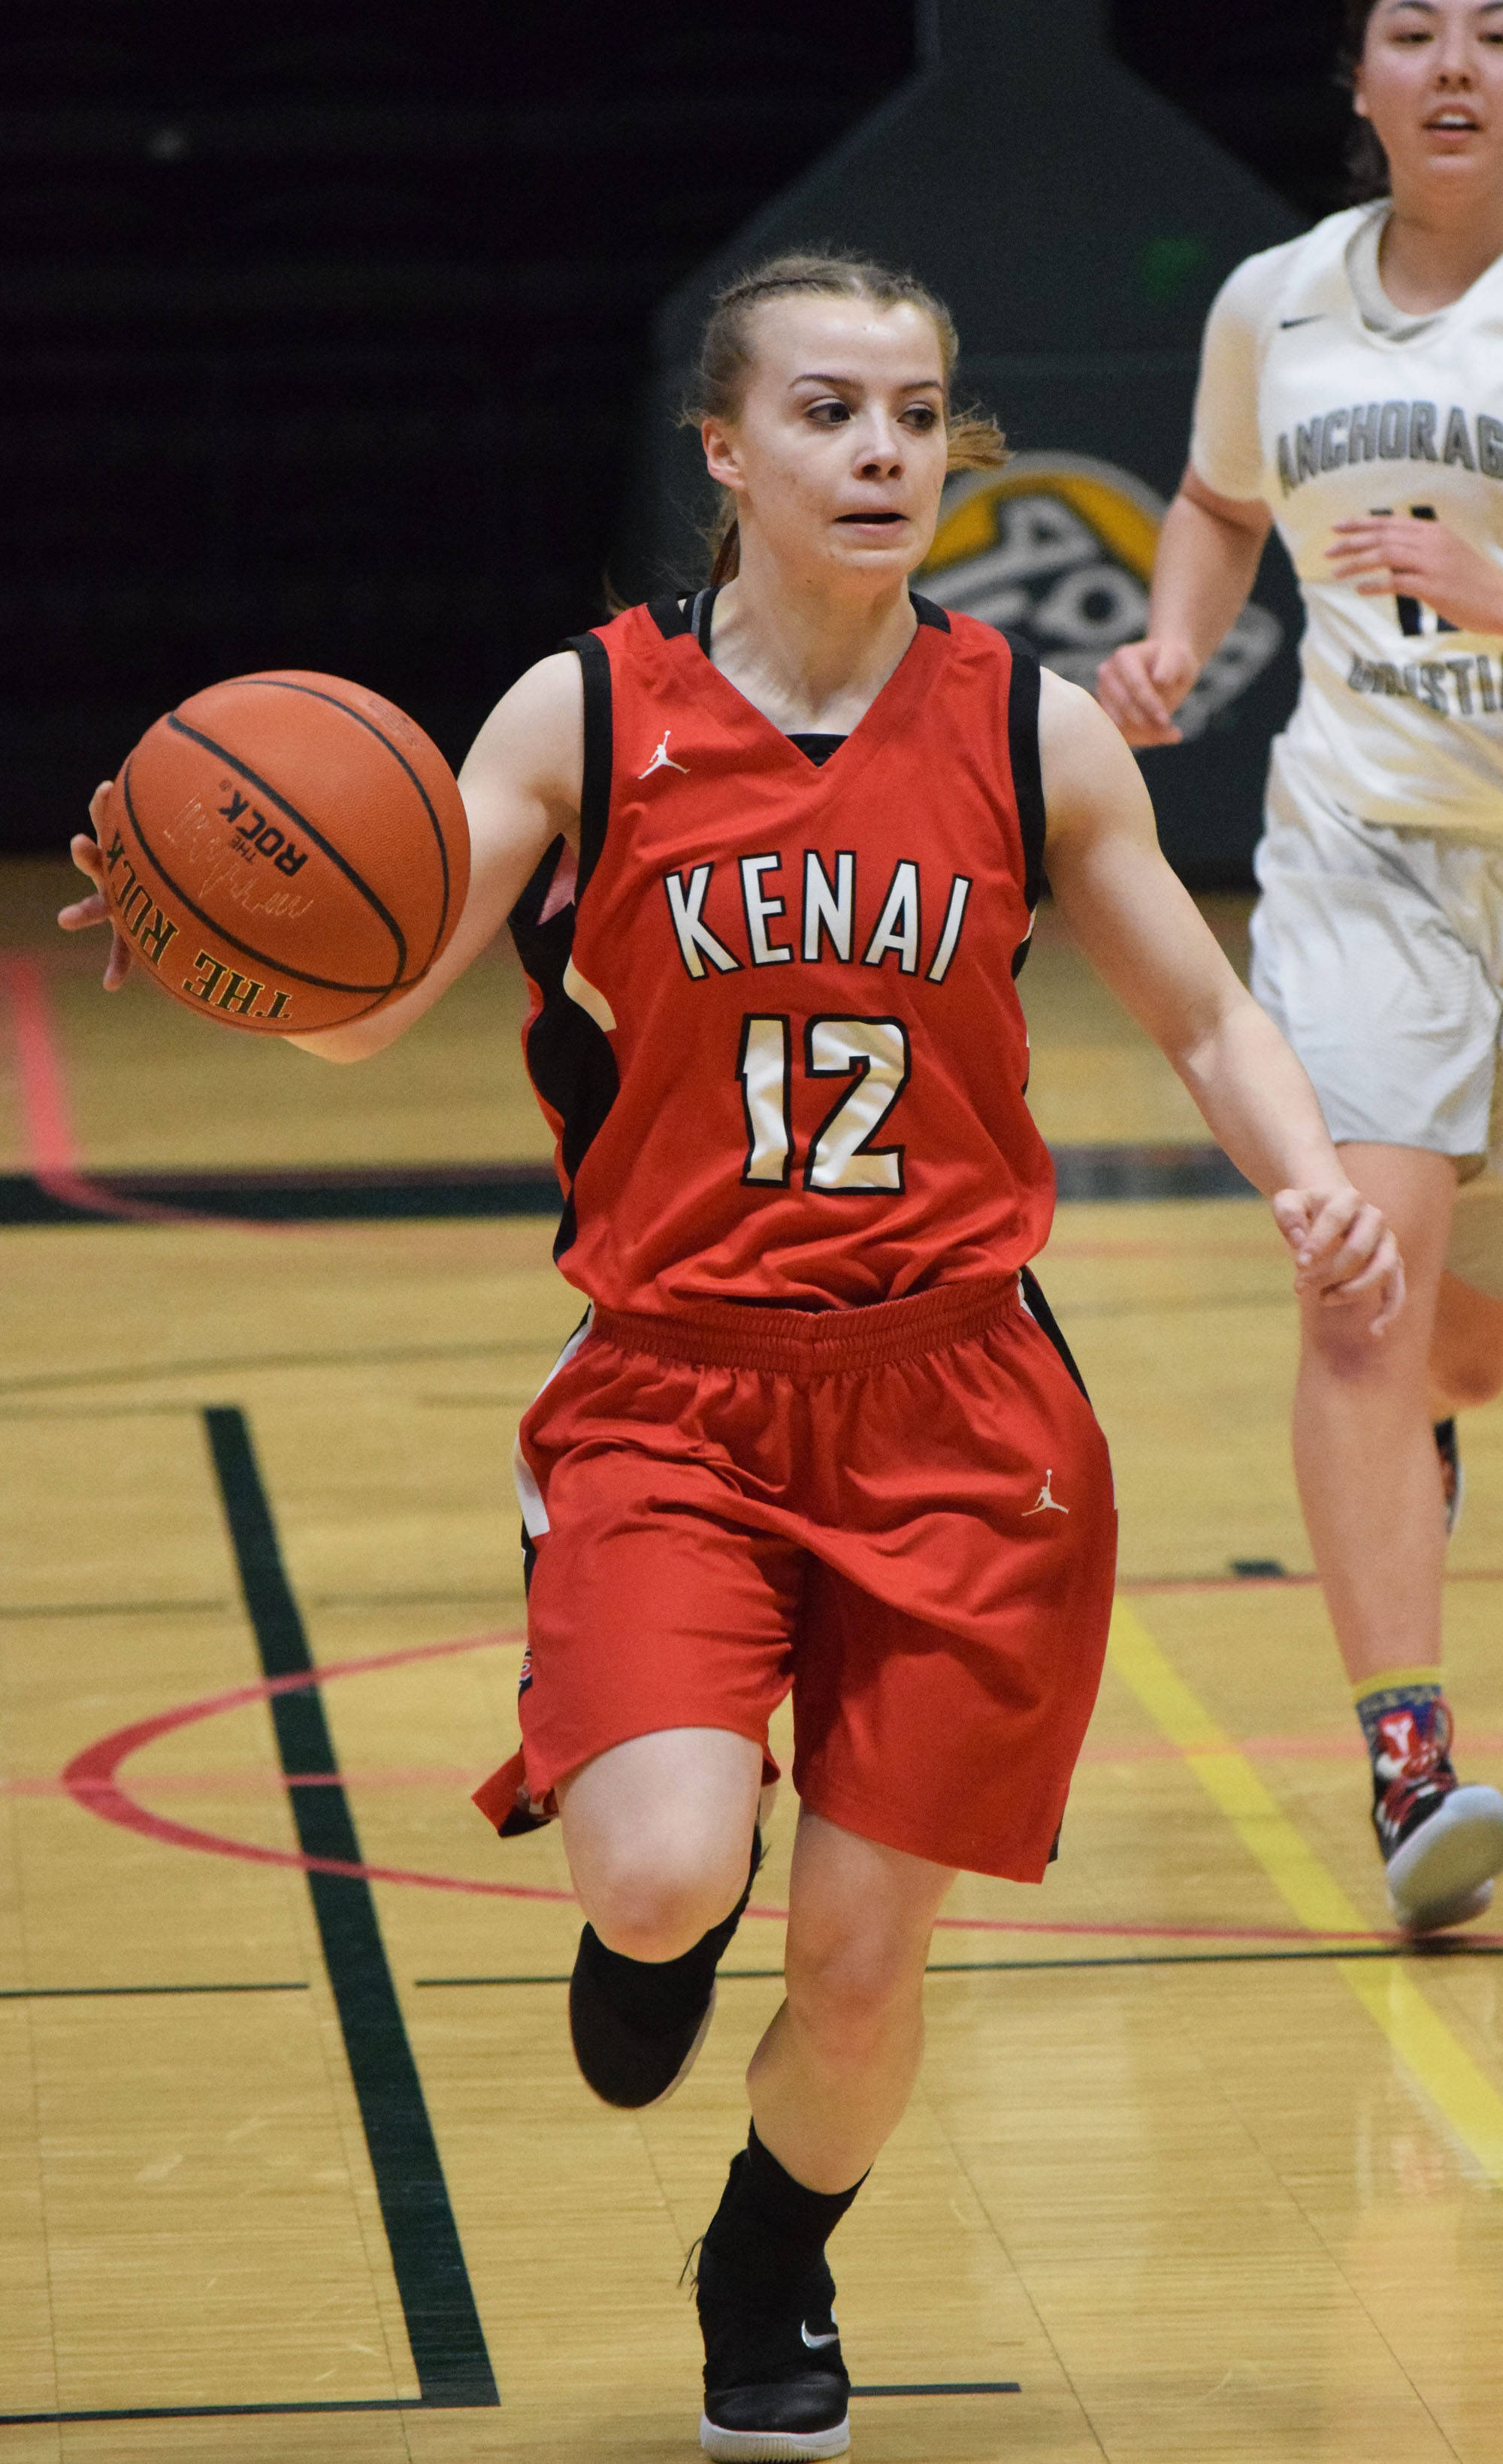 Kenai’s Hayley Maw dribbles the ball up the court Friday, March 22, 2019, against ACS at the Class 3A girls state tournament at the Alaska Airlines Center in Anchorage. (Photo by Joey Klecka/Peninsula Clarion)